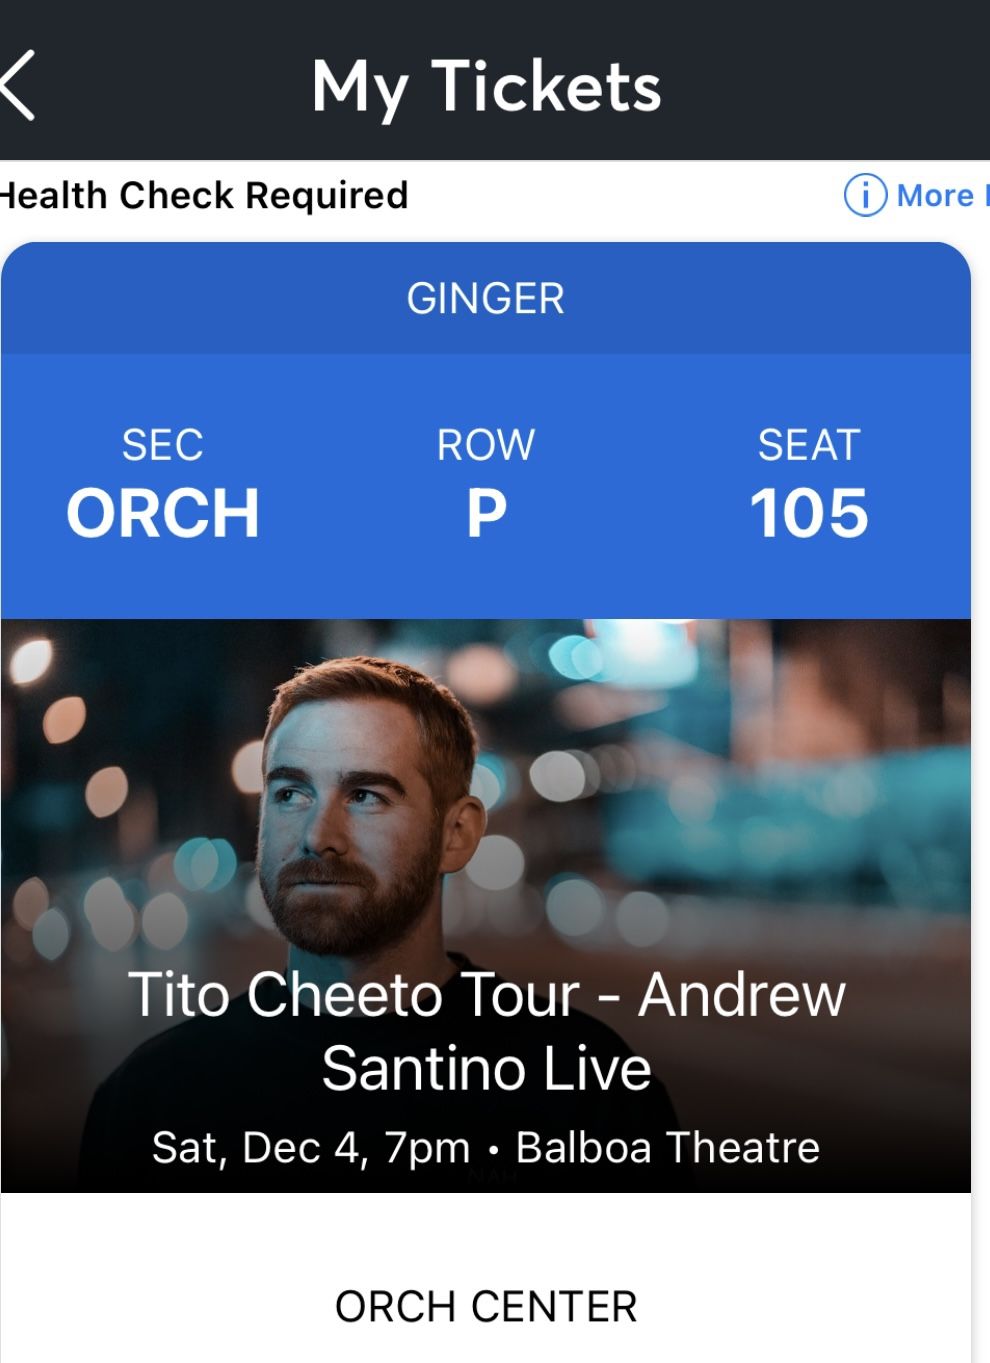 Andrew Santino Comedy Show - 2 Tickets